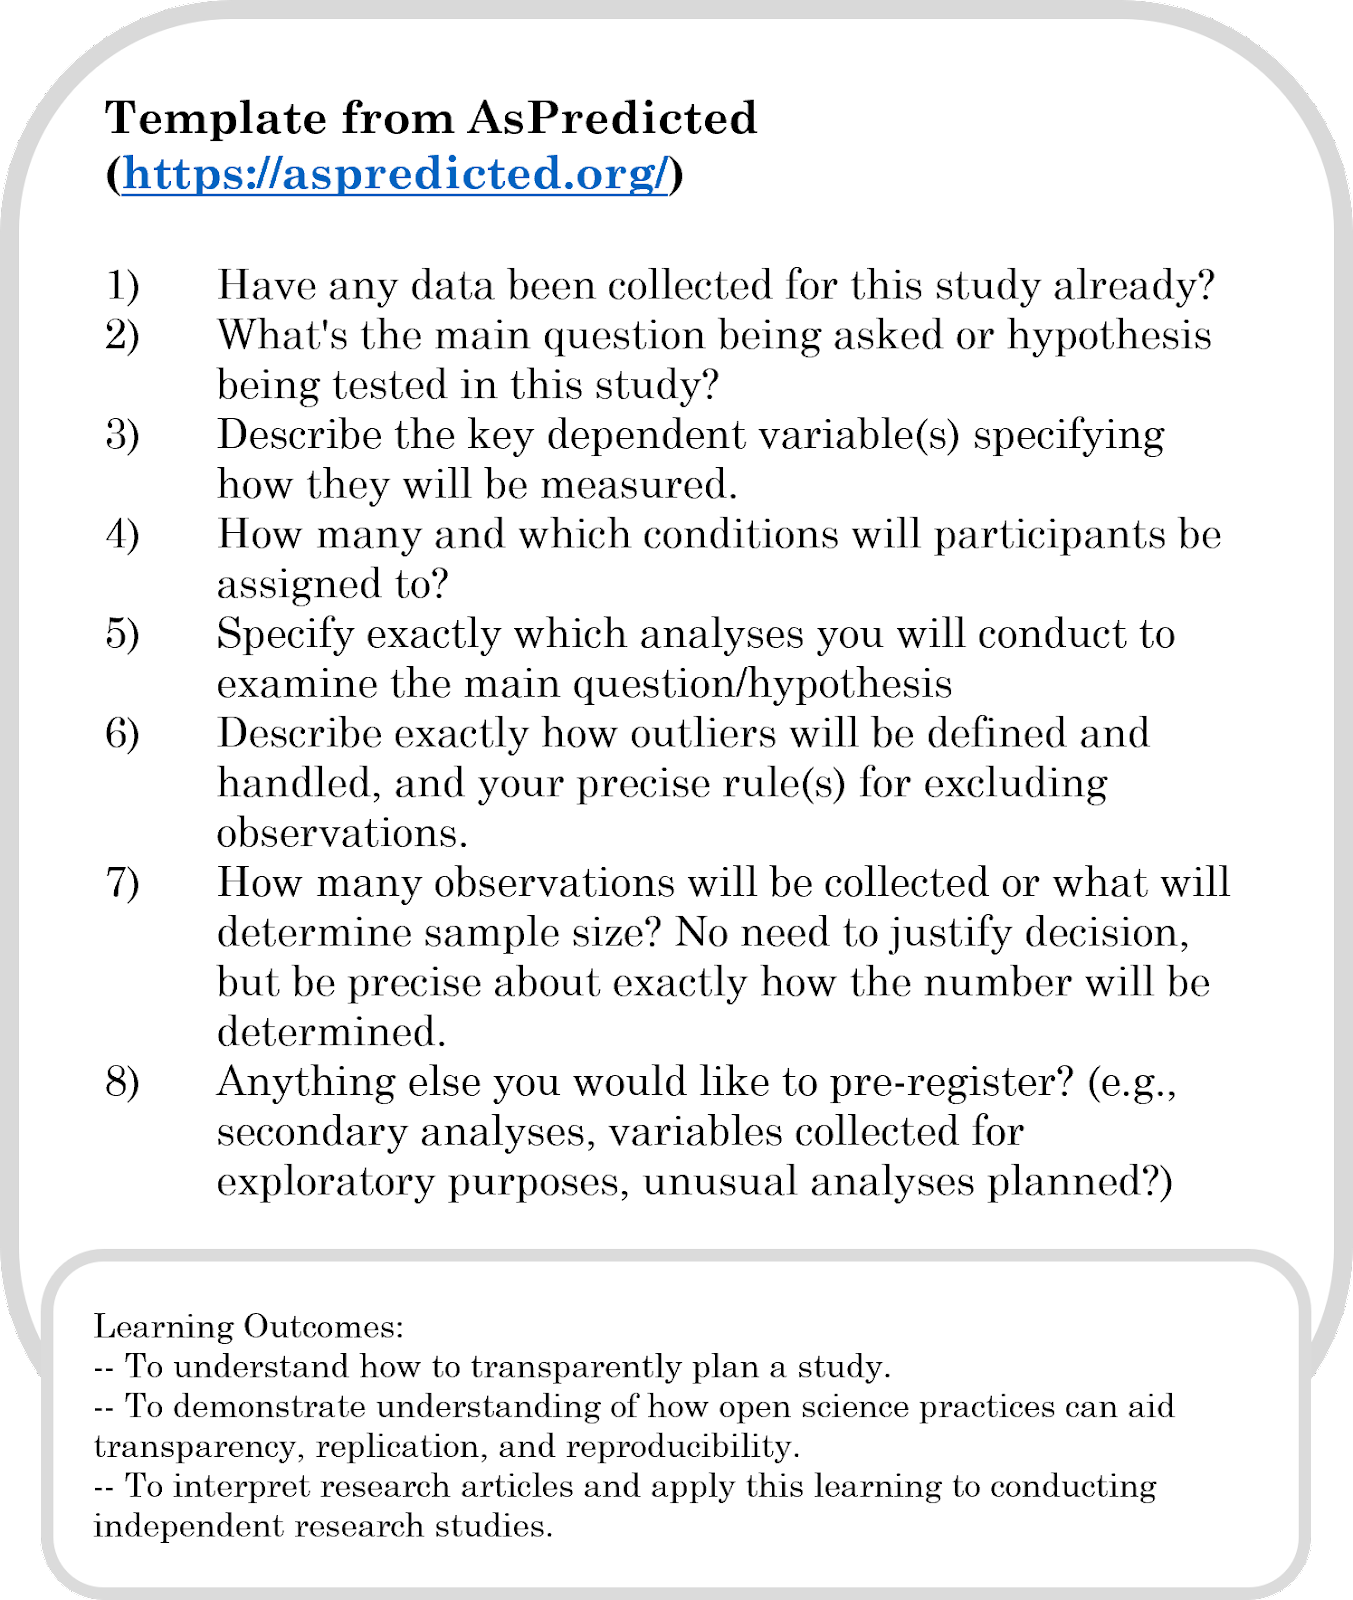 This activity asks students to write a preregistration for a replication study, using the As Predicted dot org template. The learning outcomes for this are: To understand how to transparently plan a study. To demonstrate understanding of how open science practices can aid transparency, replication, and reproducibility. To interpret research articles and apply this learning to conducting independent research studies.